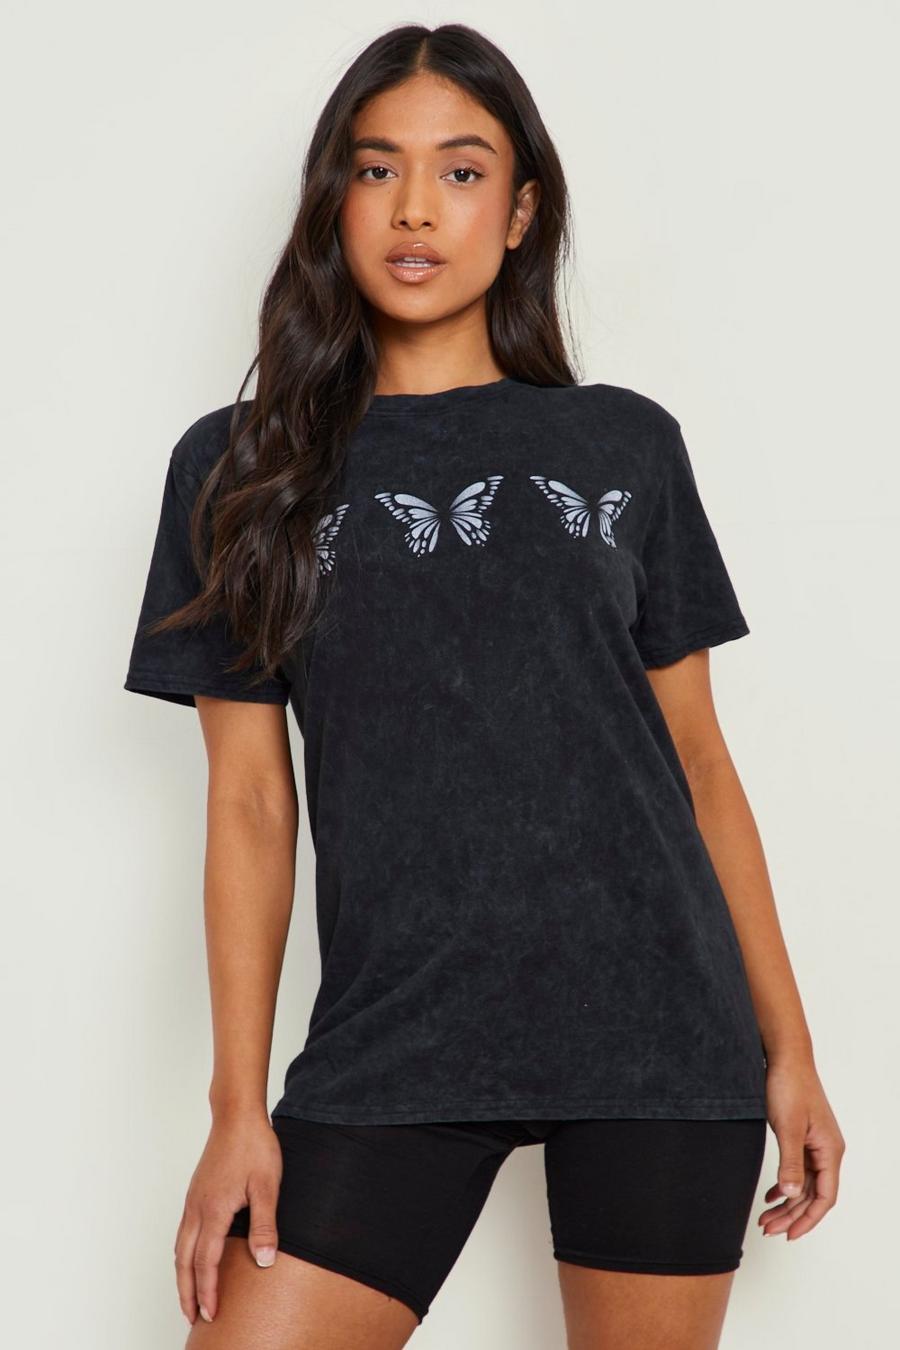 Charcoal grey Petite Acid Wash Butterfly Printed T-shirt